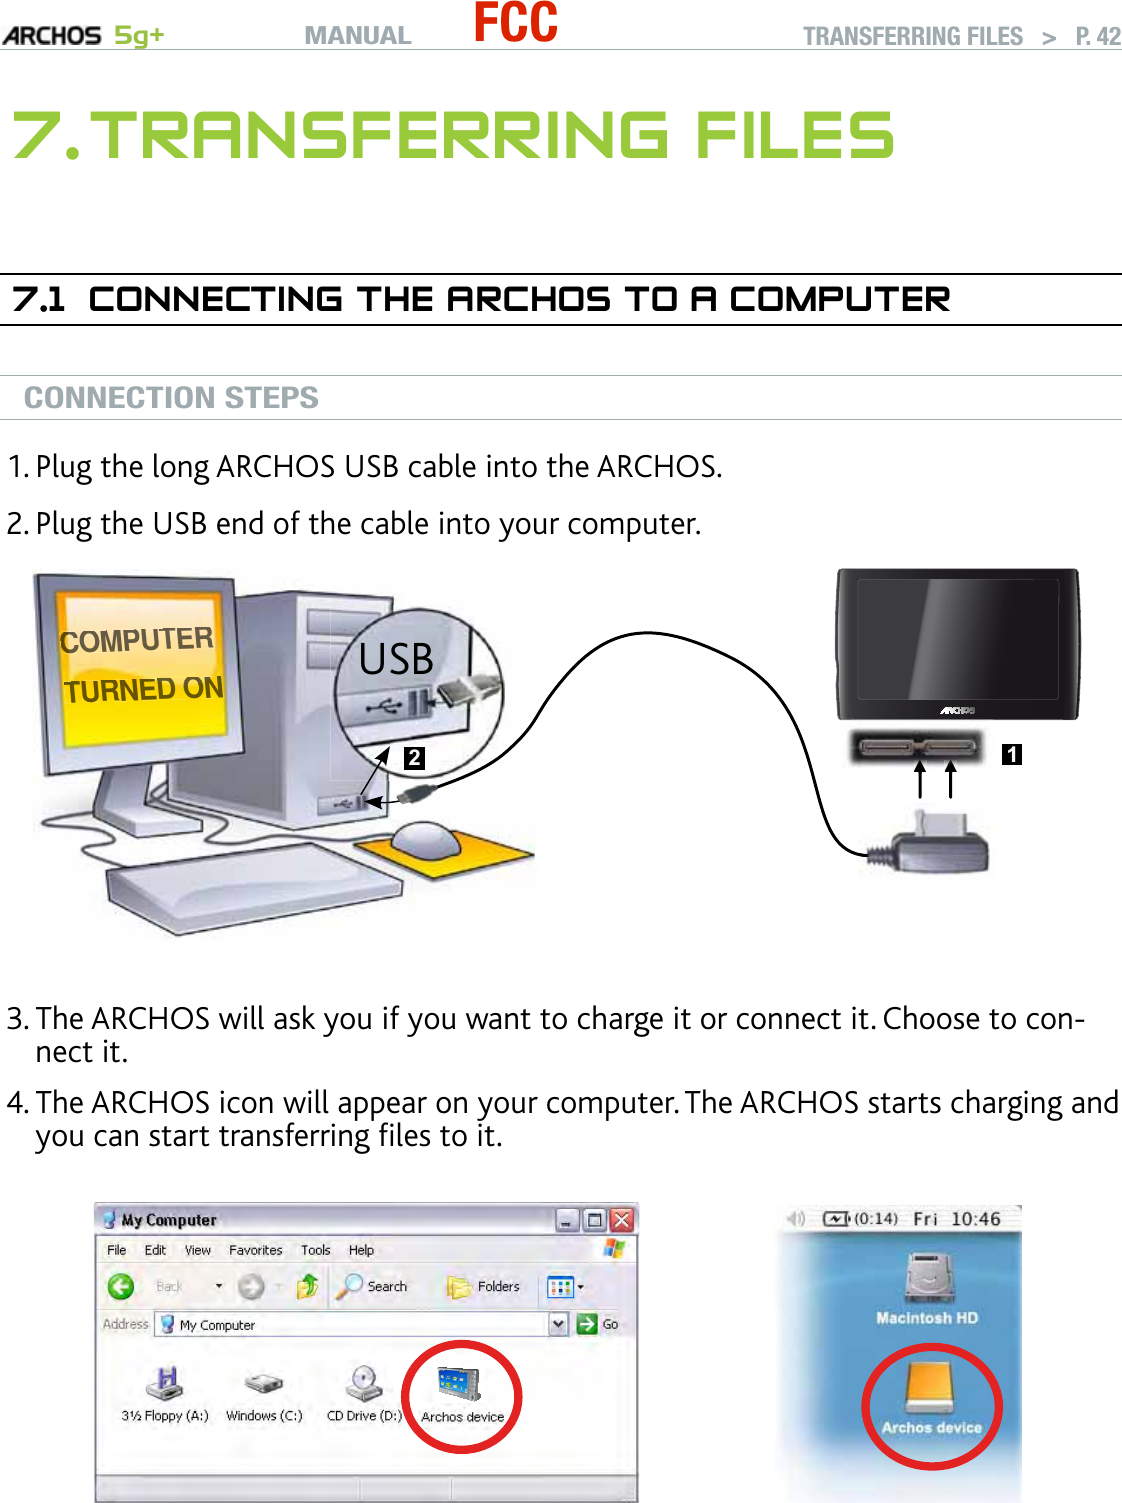 MANUAL 5g+ FCC TRANSFERRING FILES   &gt;   P. 427. TRANSFERRING FILES7.1  CONNECTING THE ARCHOS TO A COMPUTERCONNECTION STEPSPlug the long ARCHOS USB cable into the ARCHOS.Plug the USB end of the cable into your computer.CCCCCCCCCCCCCCOOMMPPUUTTEERRRRTTTURNEEEEEEEDDDDDDD OOOOOOONNNNNNNUSB 21▲ ▲▲▲▲▲▲▲▲▲▲▲▲▲▲The ARCHOS will ask you if you want to charge it or connect it. Choose to con-nect it. The ARCHOS icon will appear on your computer. The ARCHOS starts charging and you can start transferring ﬁles to it.If you do not have Windows Media® Player 10 or higher installed on your com-puter, the ARCHOS will ask you if you want to charge its battery or connect it as a mass storage device (Hard Drive). Choose to connect it. 1.2.3.4.